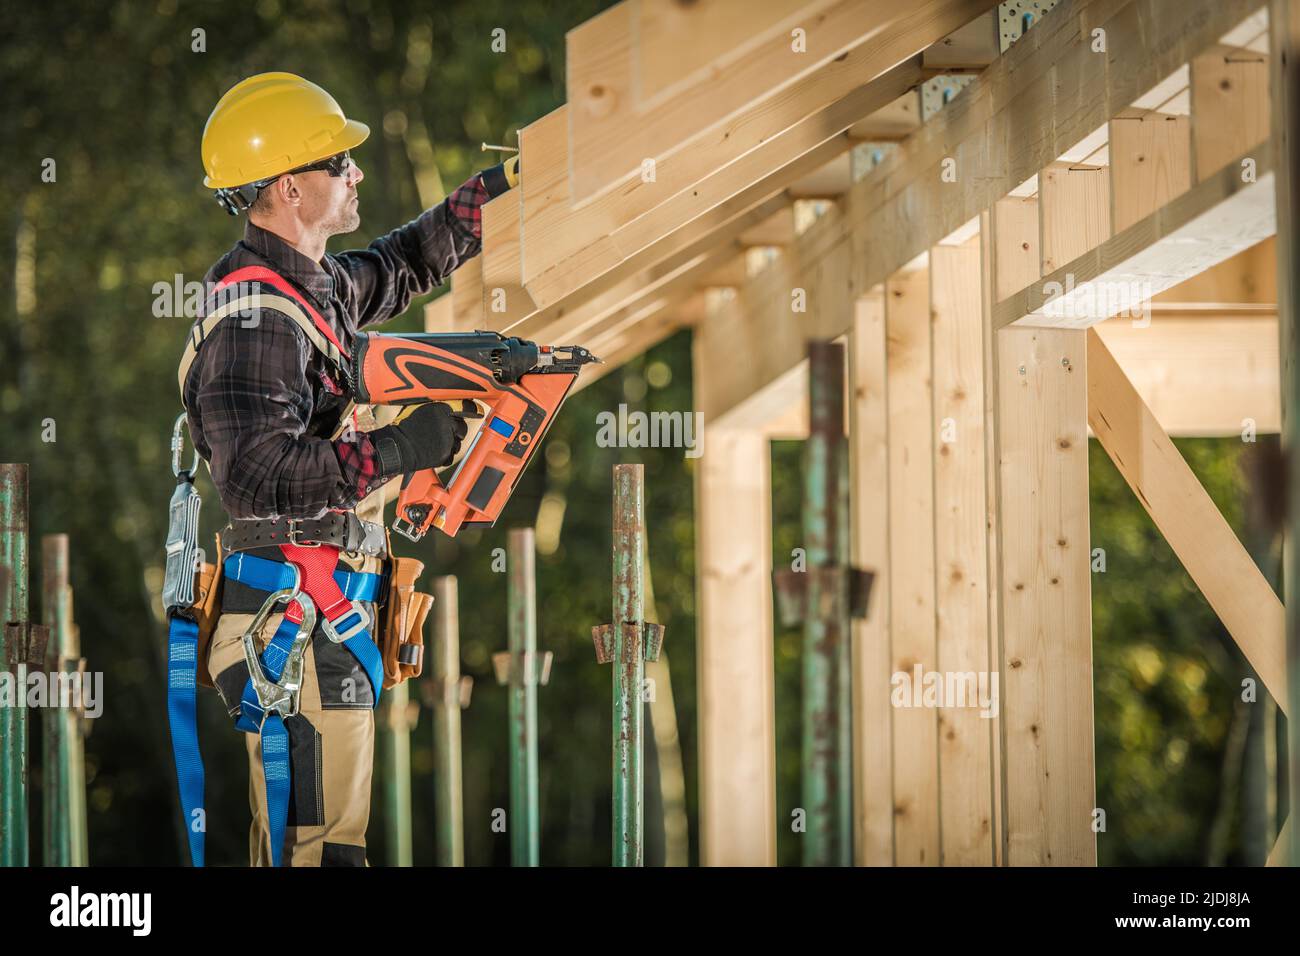 Professionally Equipped Caucasian Carpenter at His 40s Working on Finishing the Wooden Roof Skeleton Using Nail Gun Construction Tool. Construction Si Stock Photo